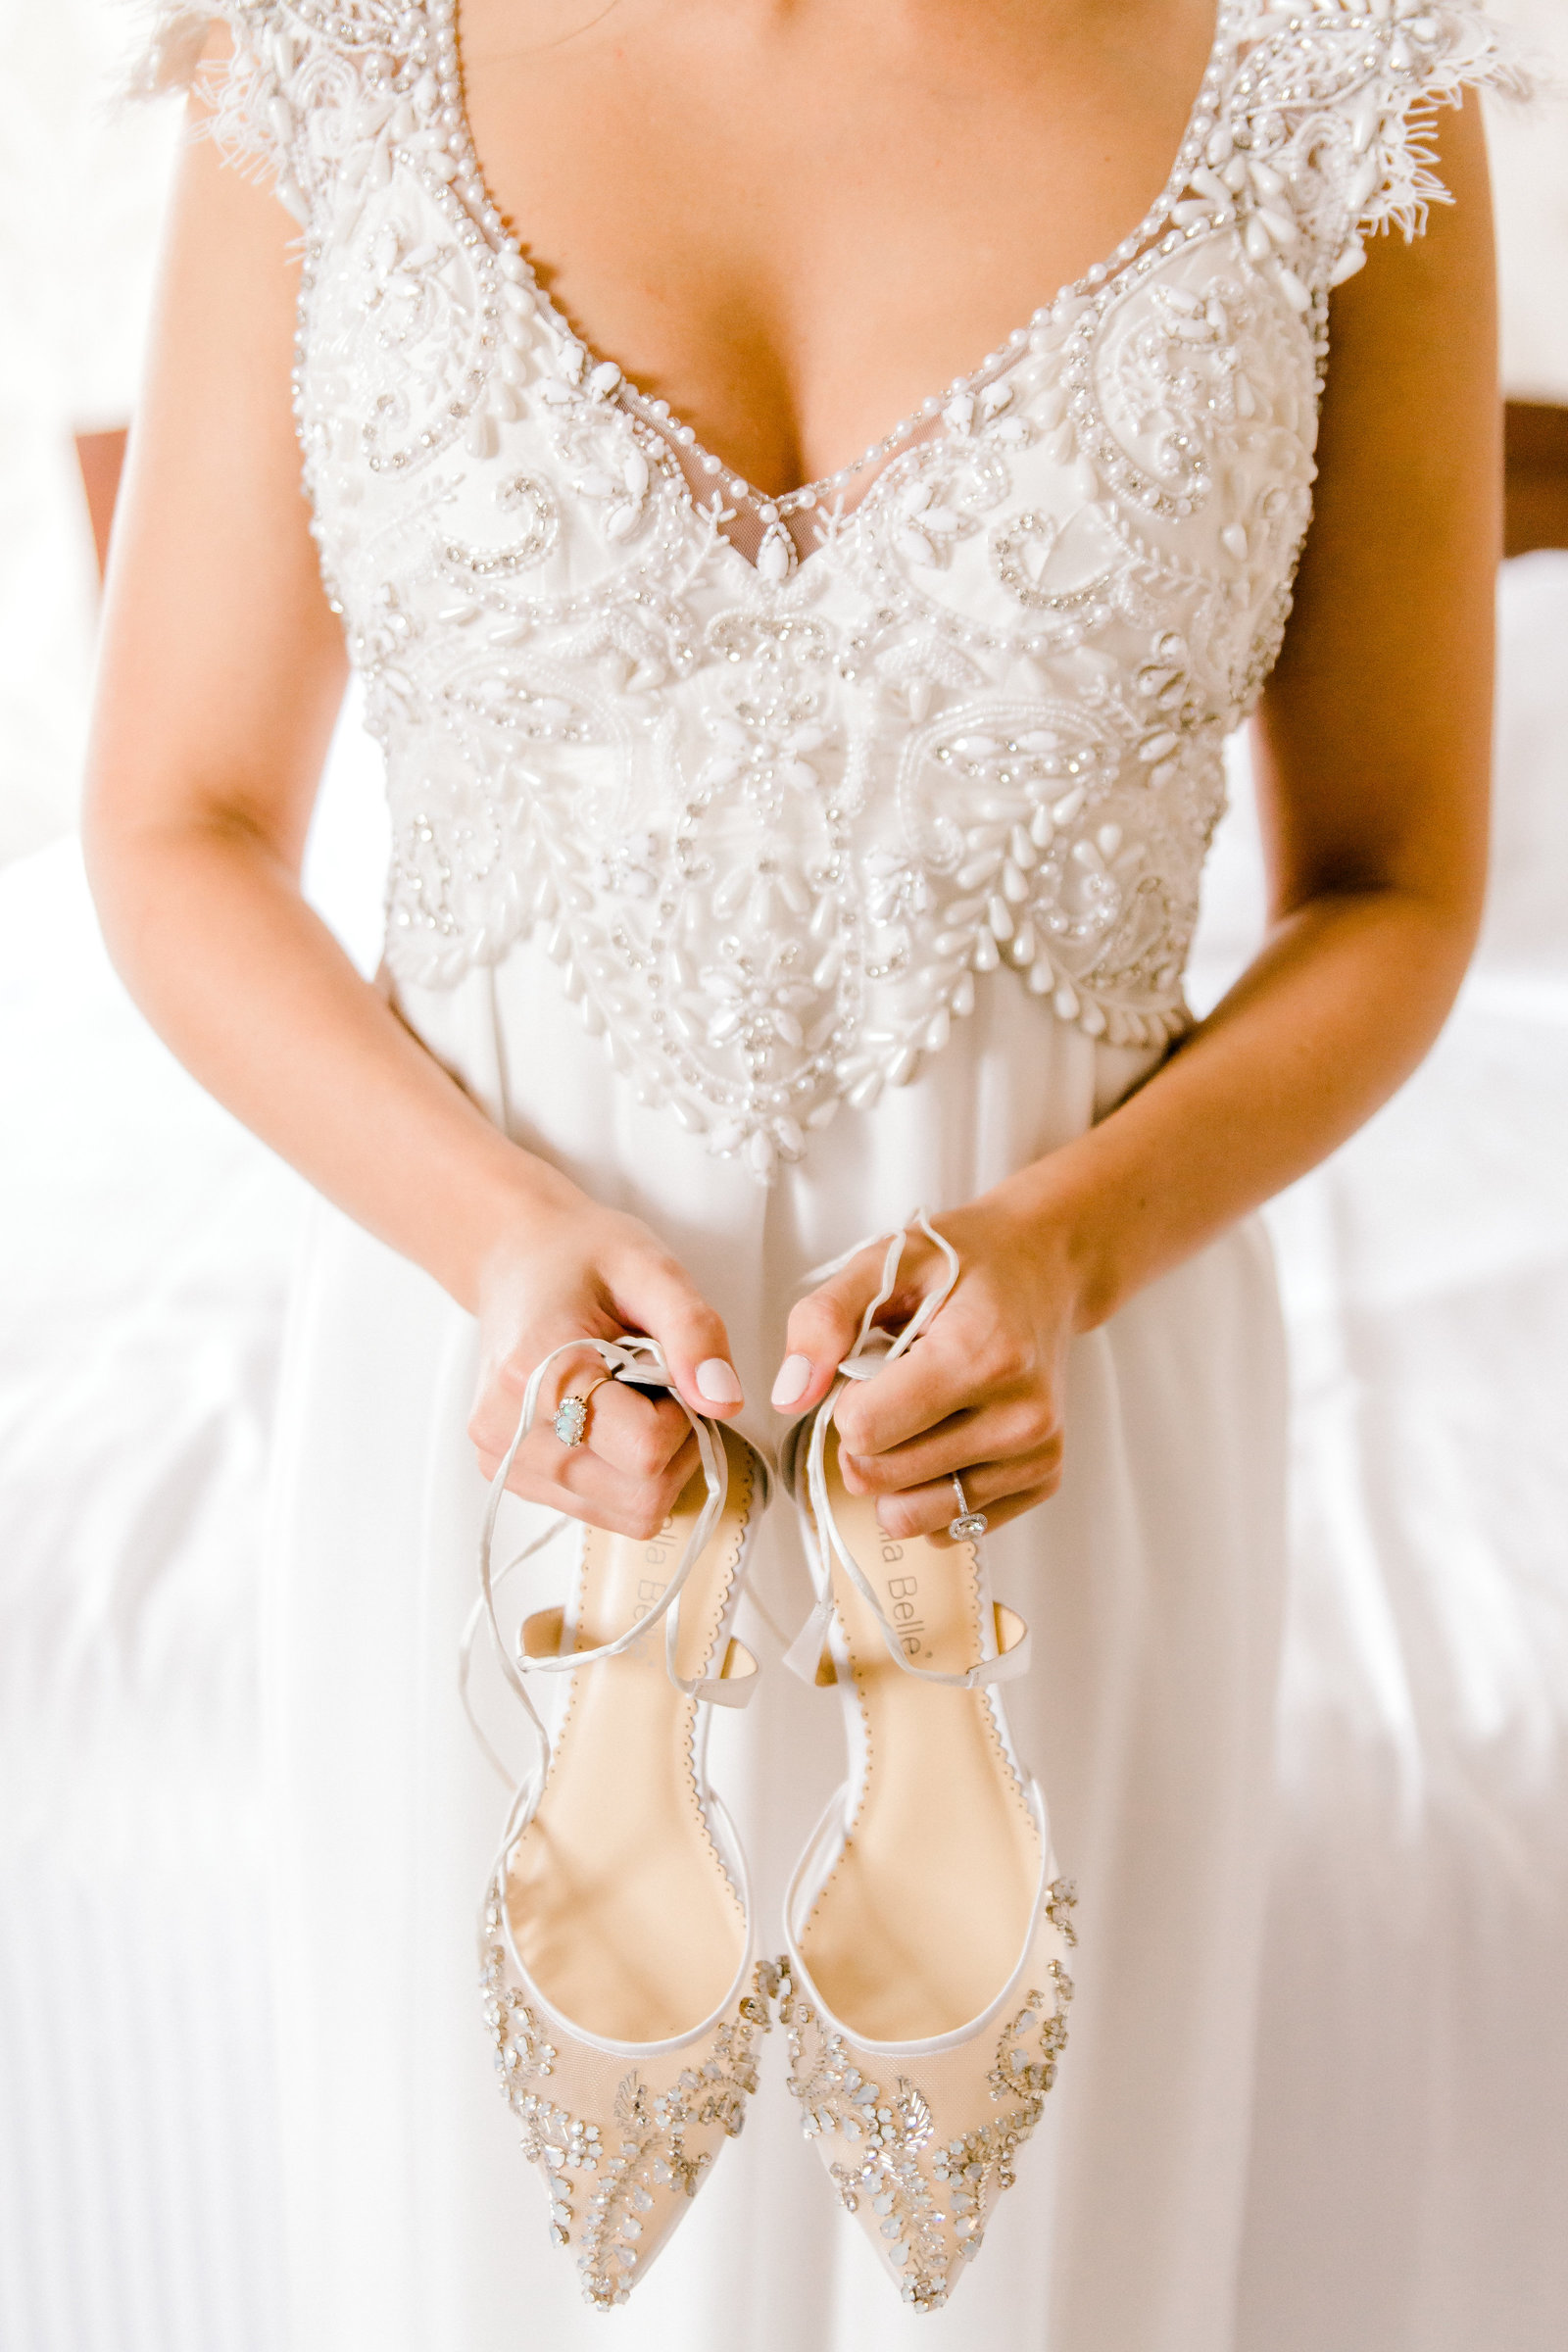 bride getting ready, wedding shoes wedding photography by local chicago wedding photographer bozena voytko, wedding photographers, best chicago wedding photographer, chicago Il wedding photographer